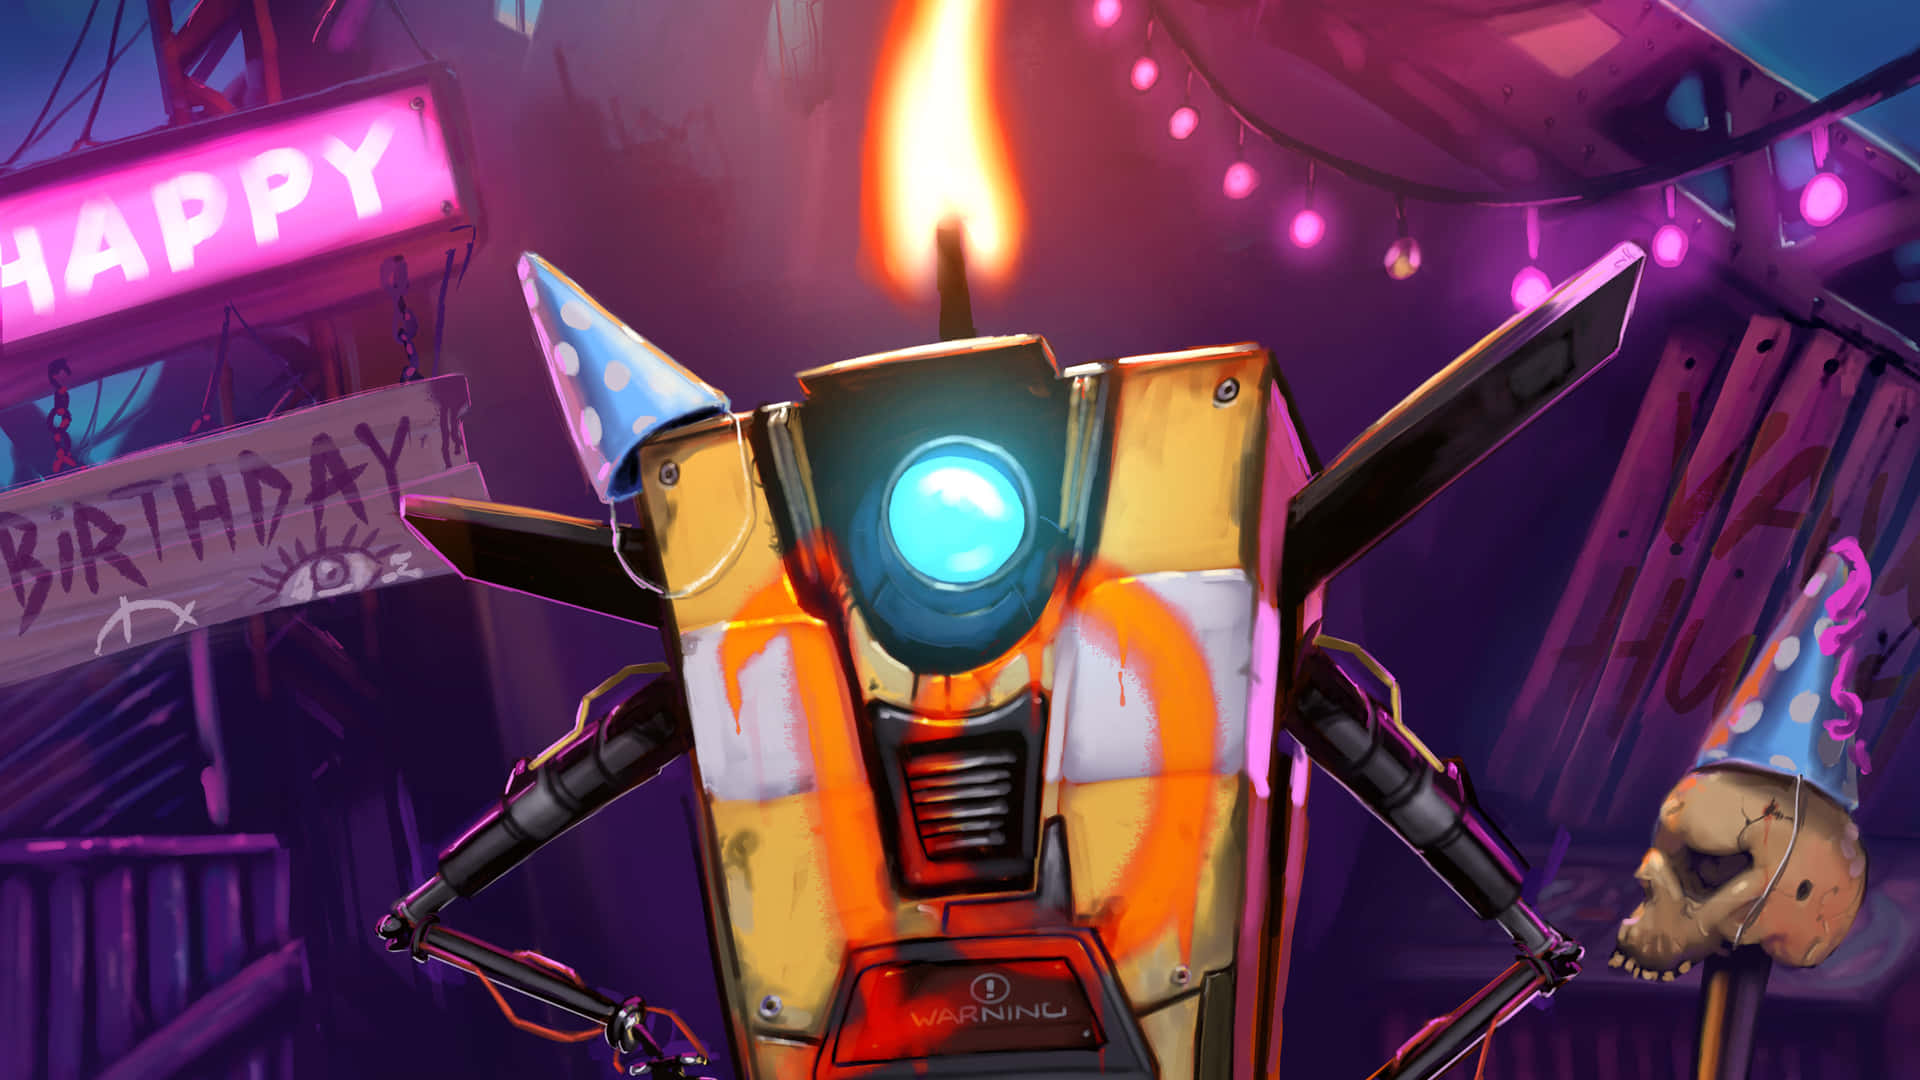 Borderlands 2 - A Robot With A Birthday Cake